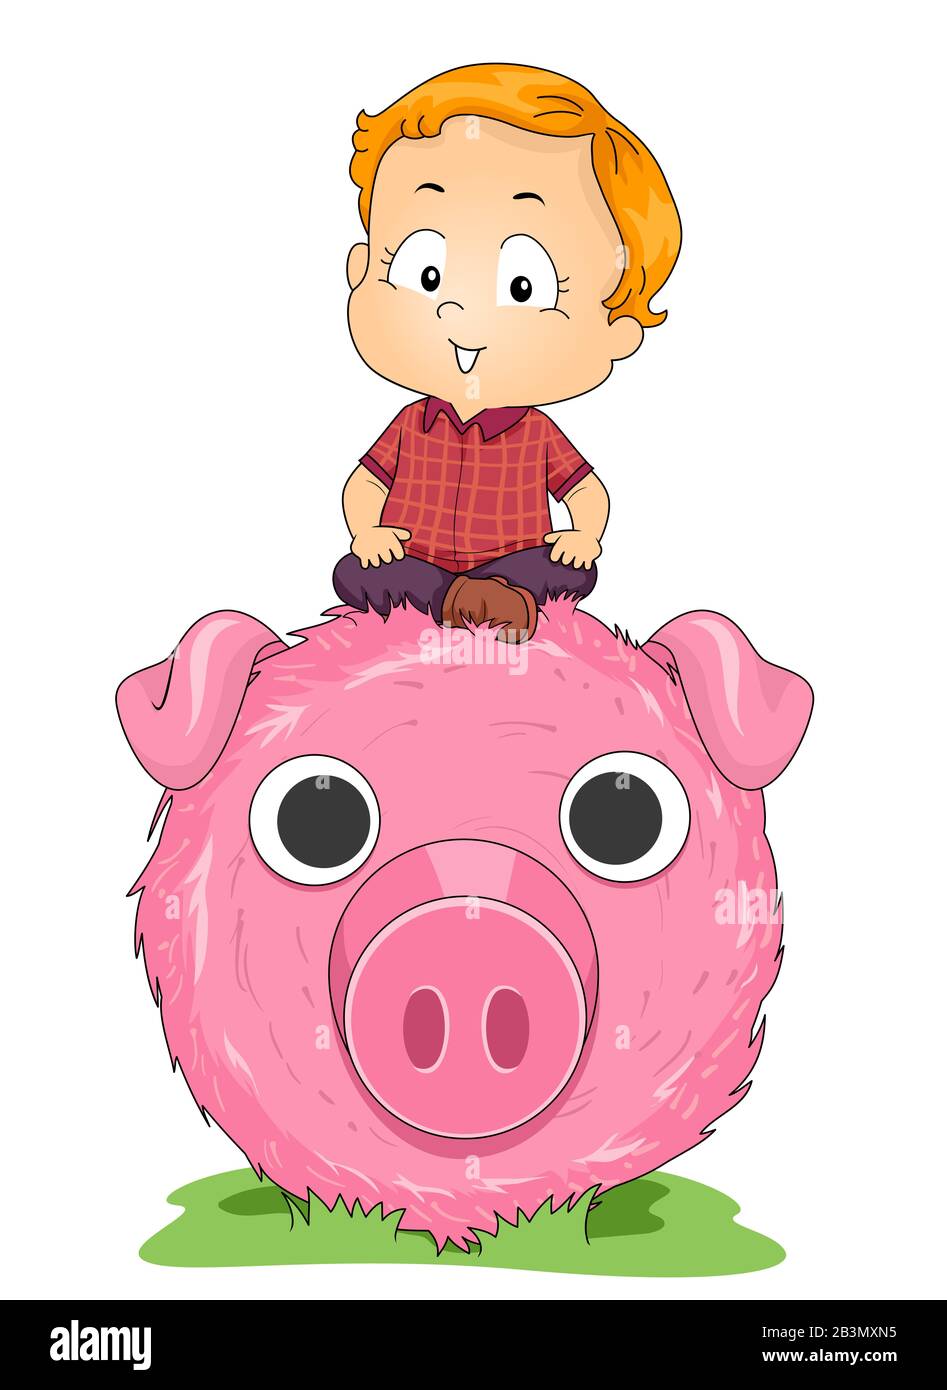 Illustration of a Kid Boy Sitting on a Round Pig Face Made of Haystack for Art in Farm Stock Photo